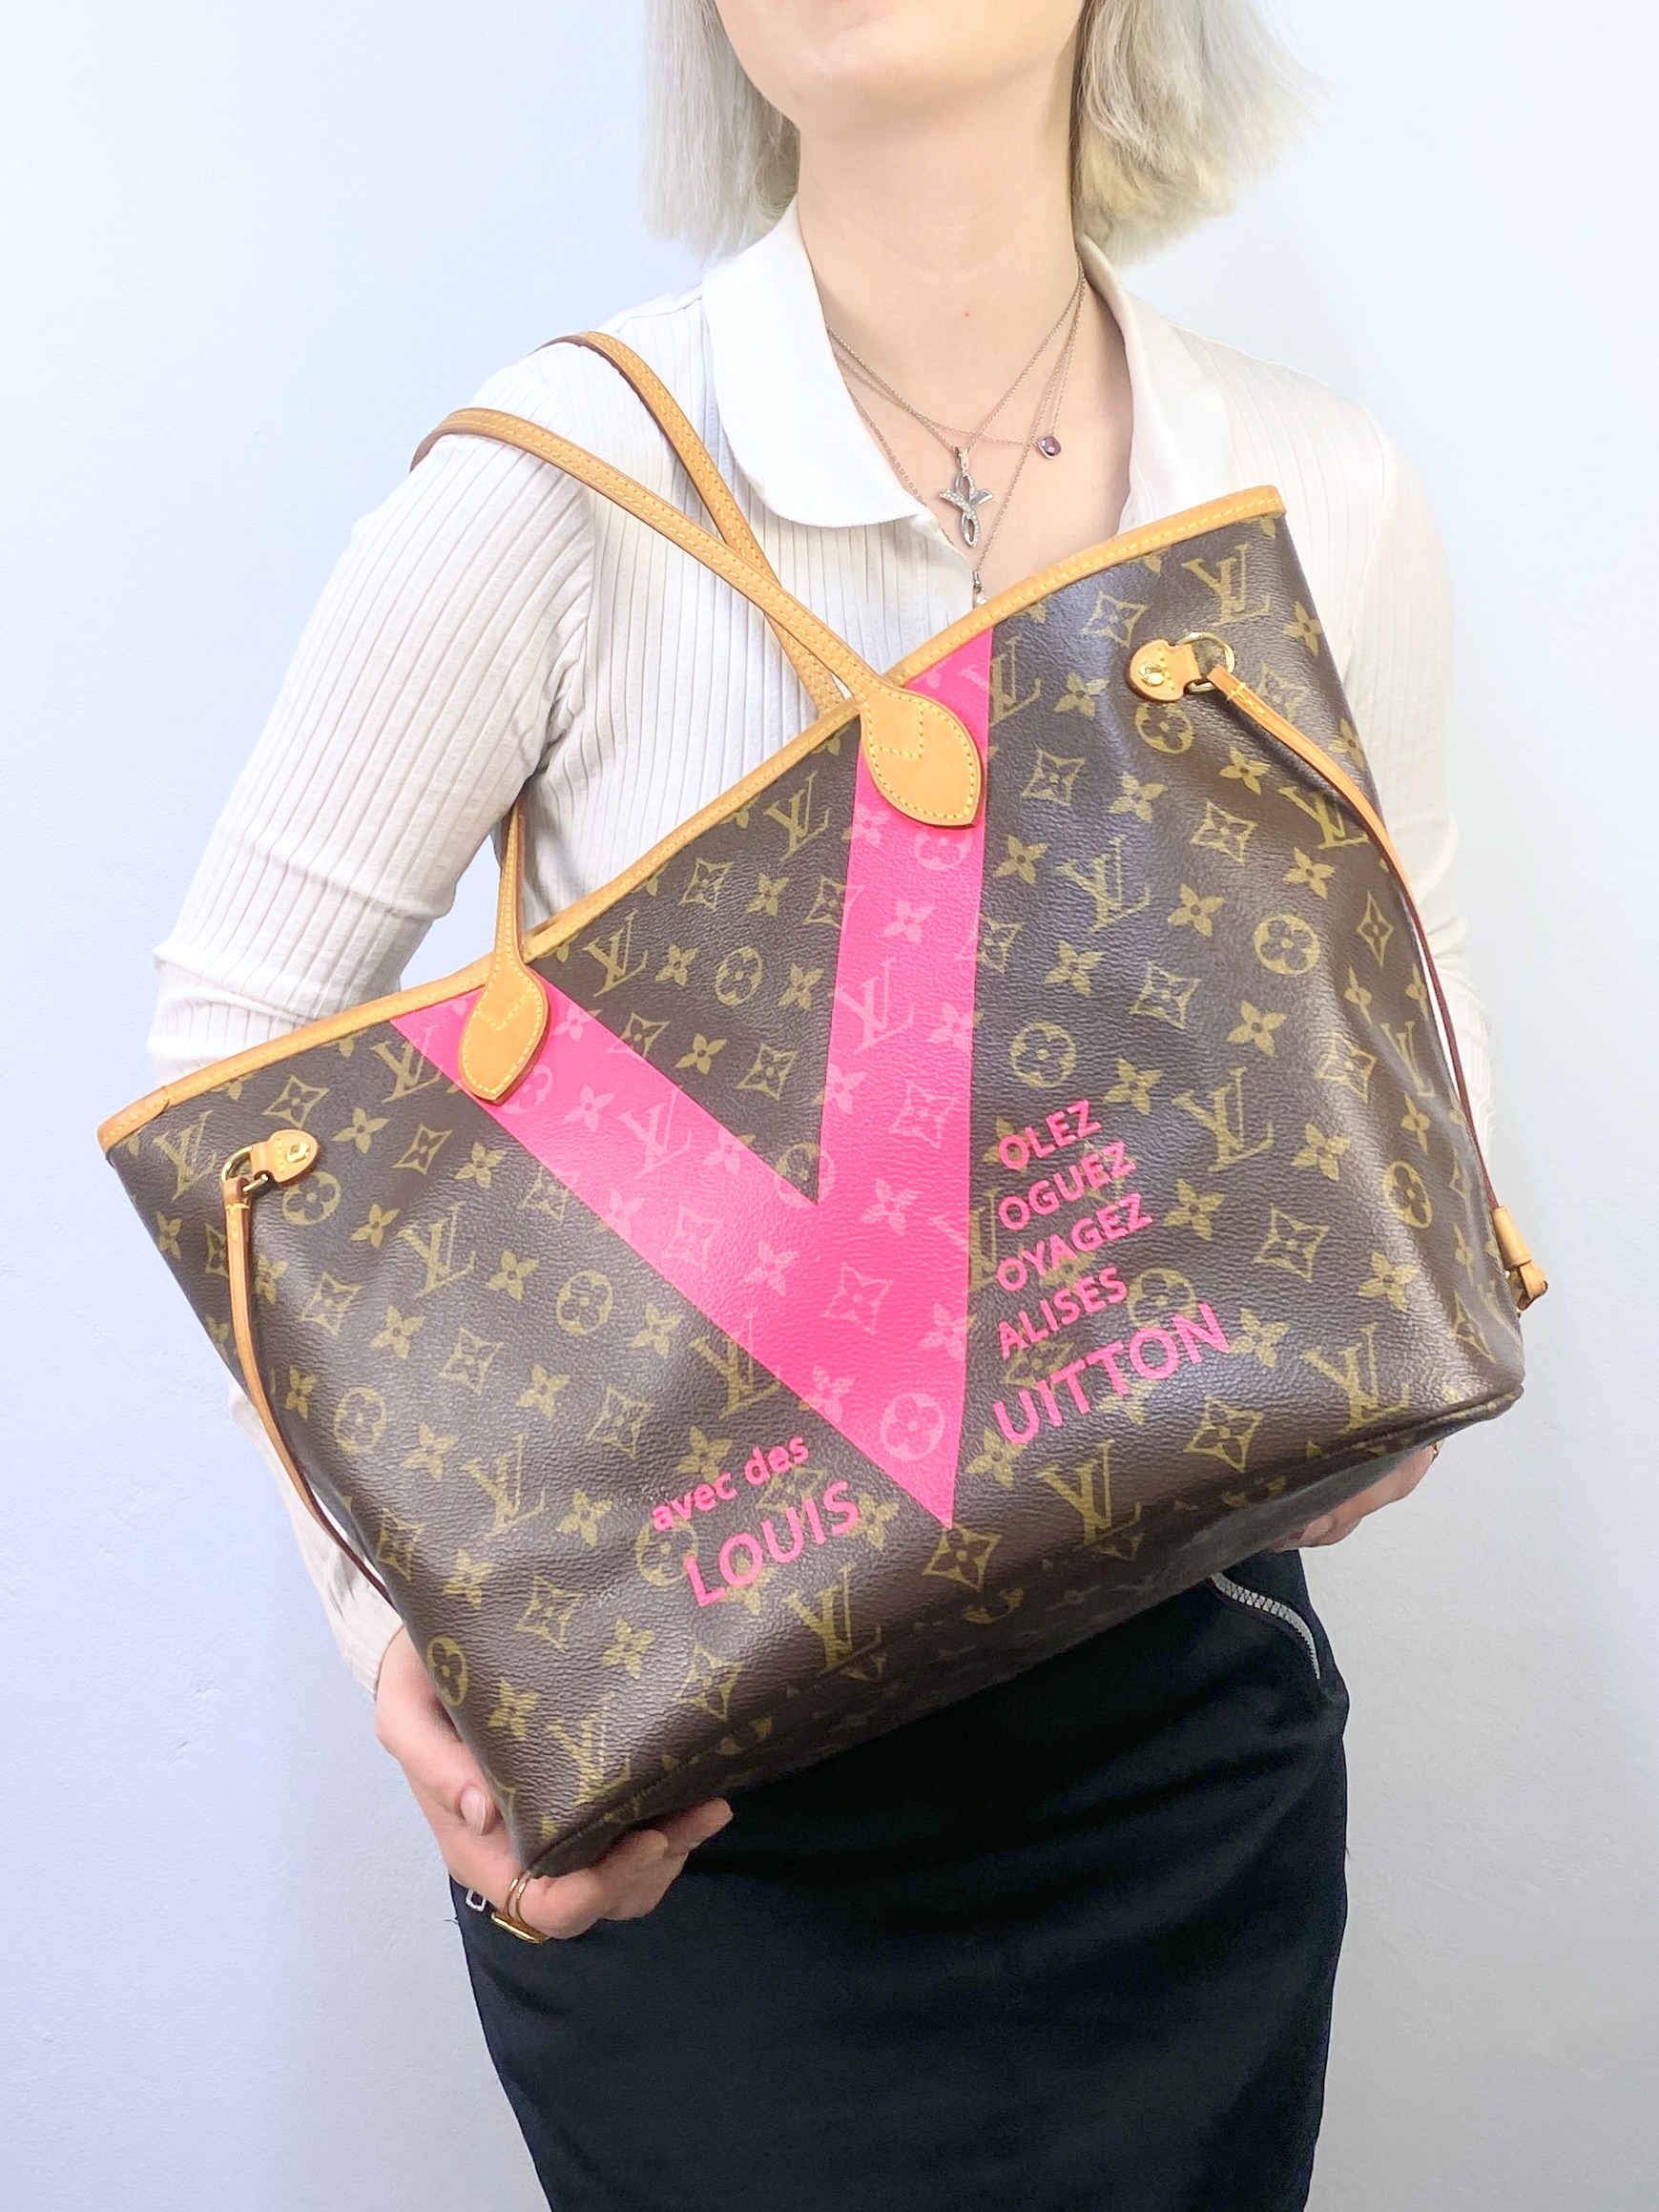 Louis Vuitton, Bags, Louis Vuitton V Neverfull Mm Grenade Pink Monogram  Limited Edition Tote